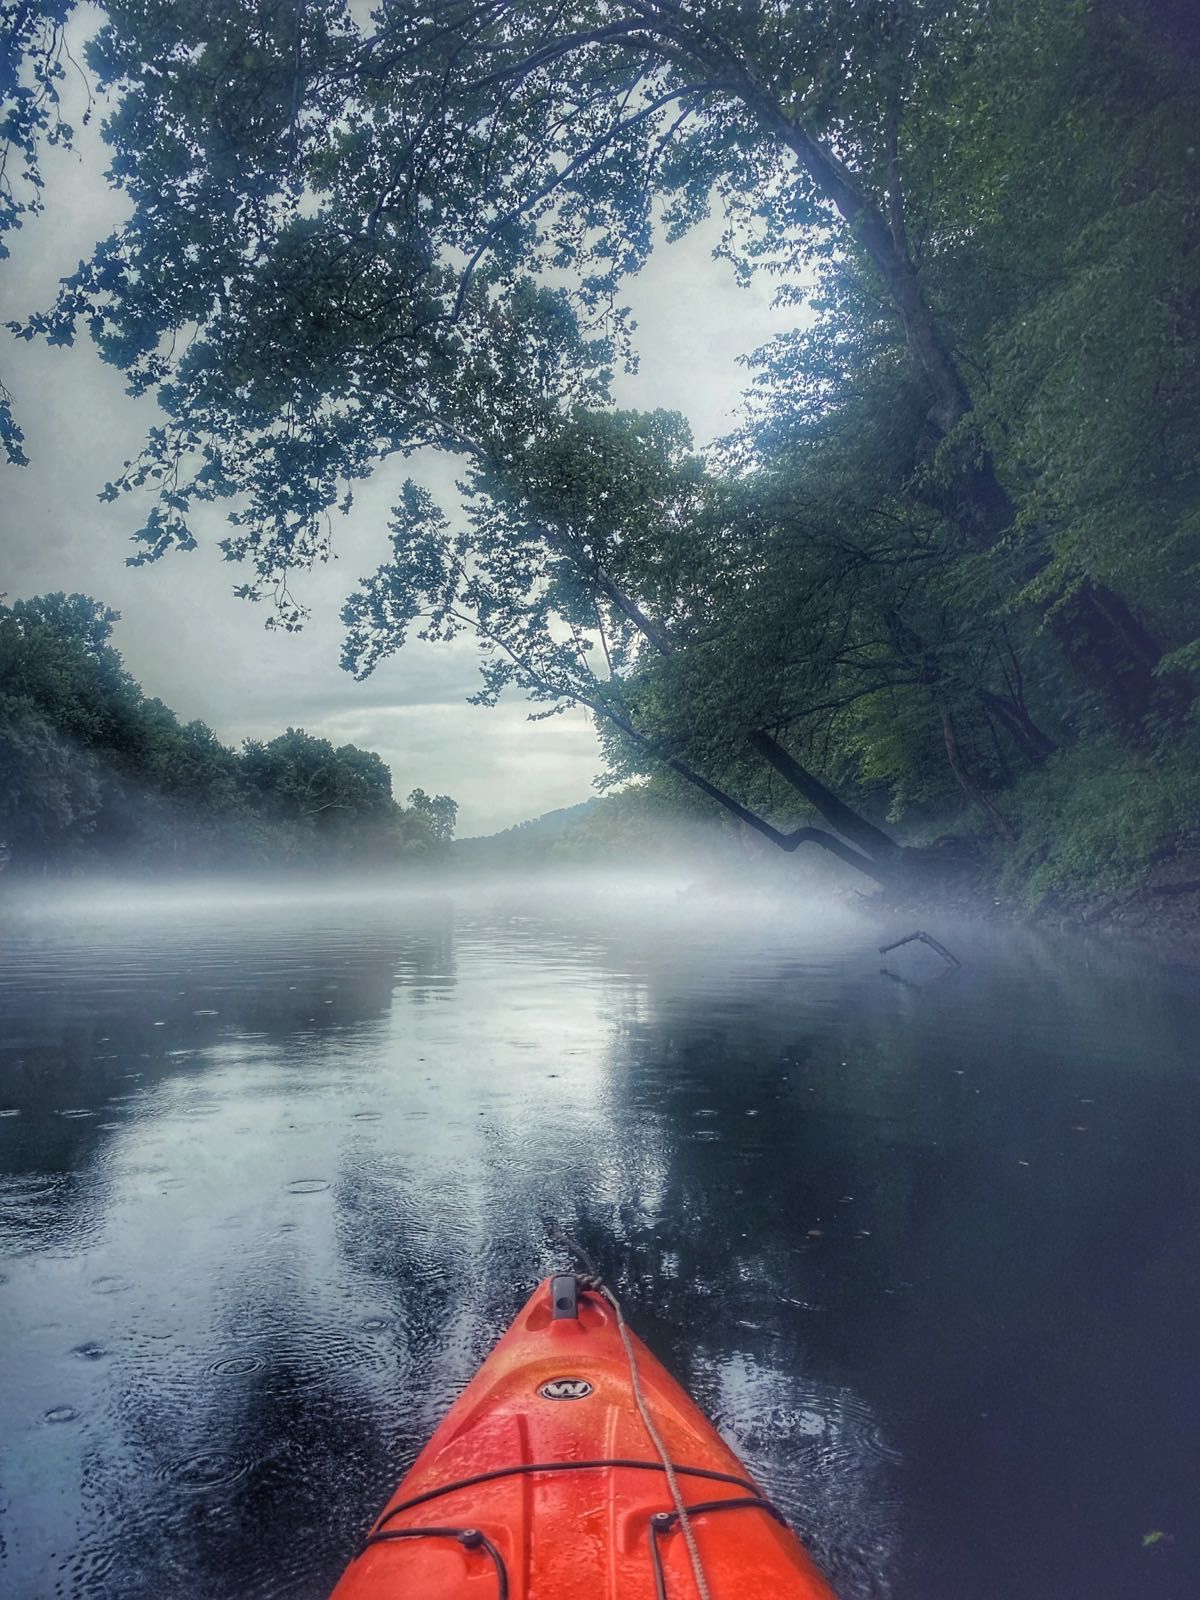 The Carney Fork river in Tennessee is usually misty in summers so it makes for a surreal kayak.